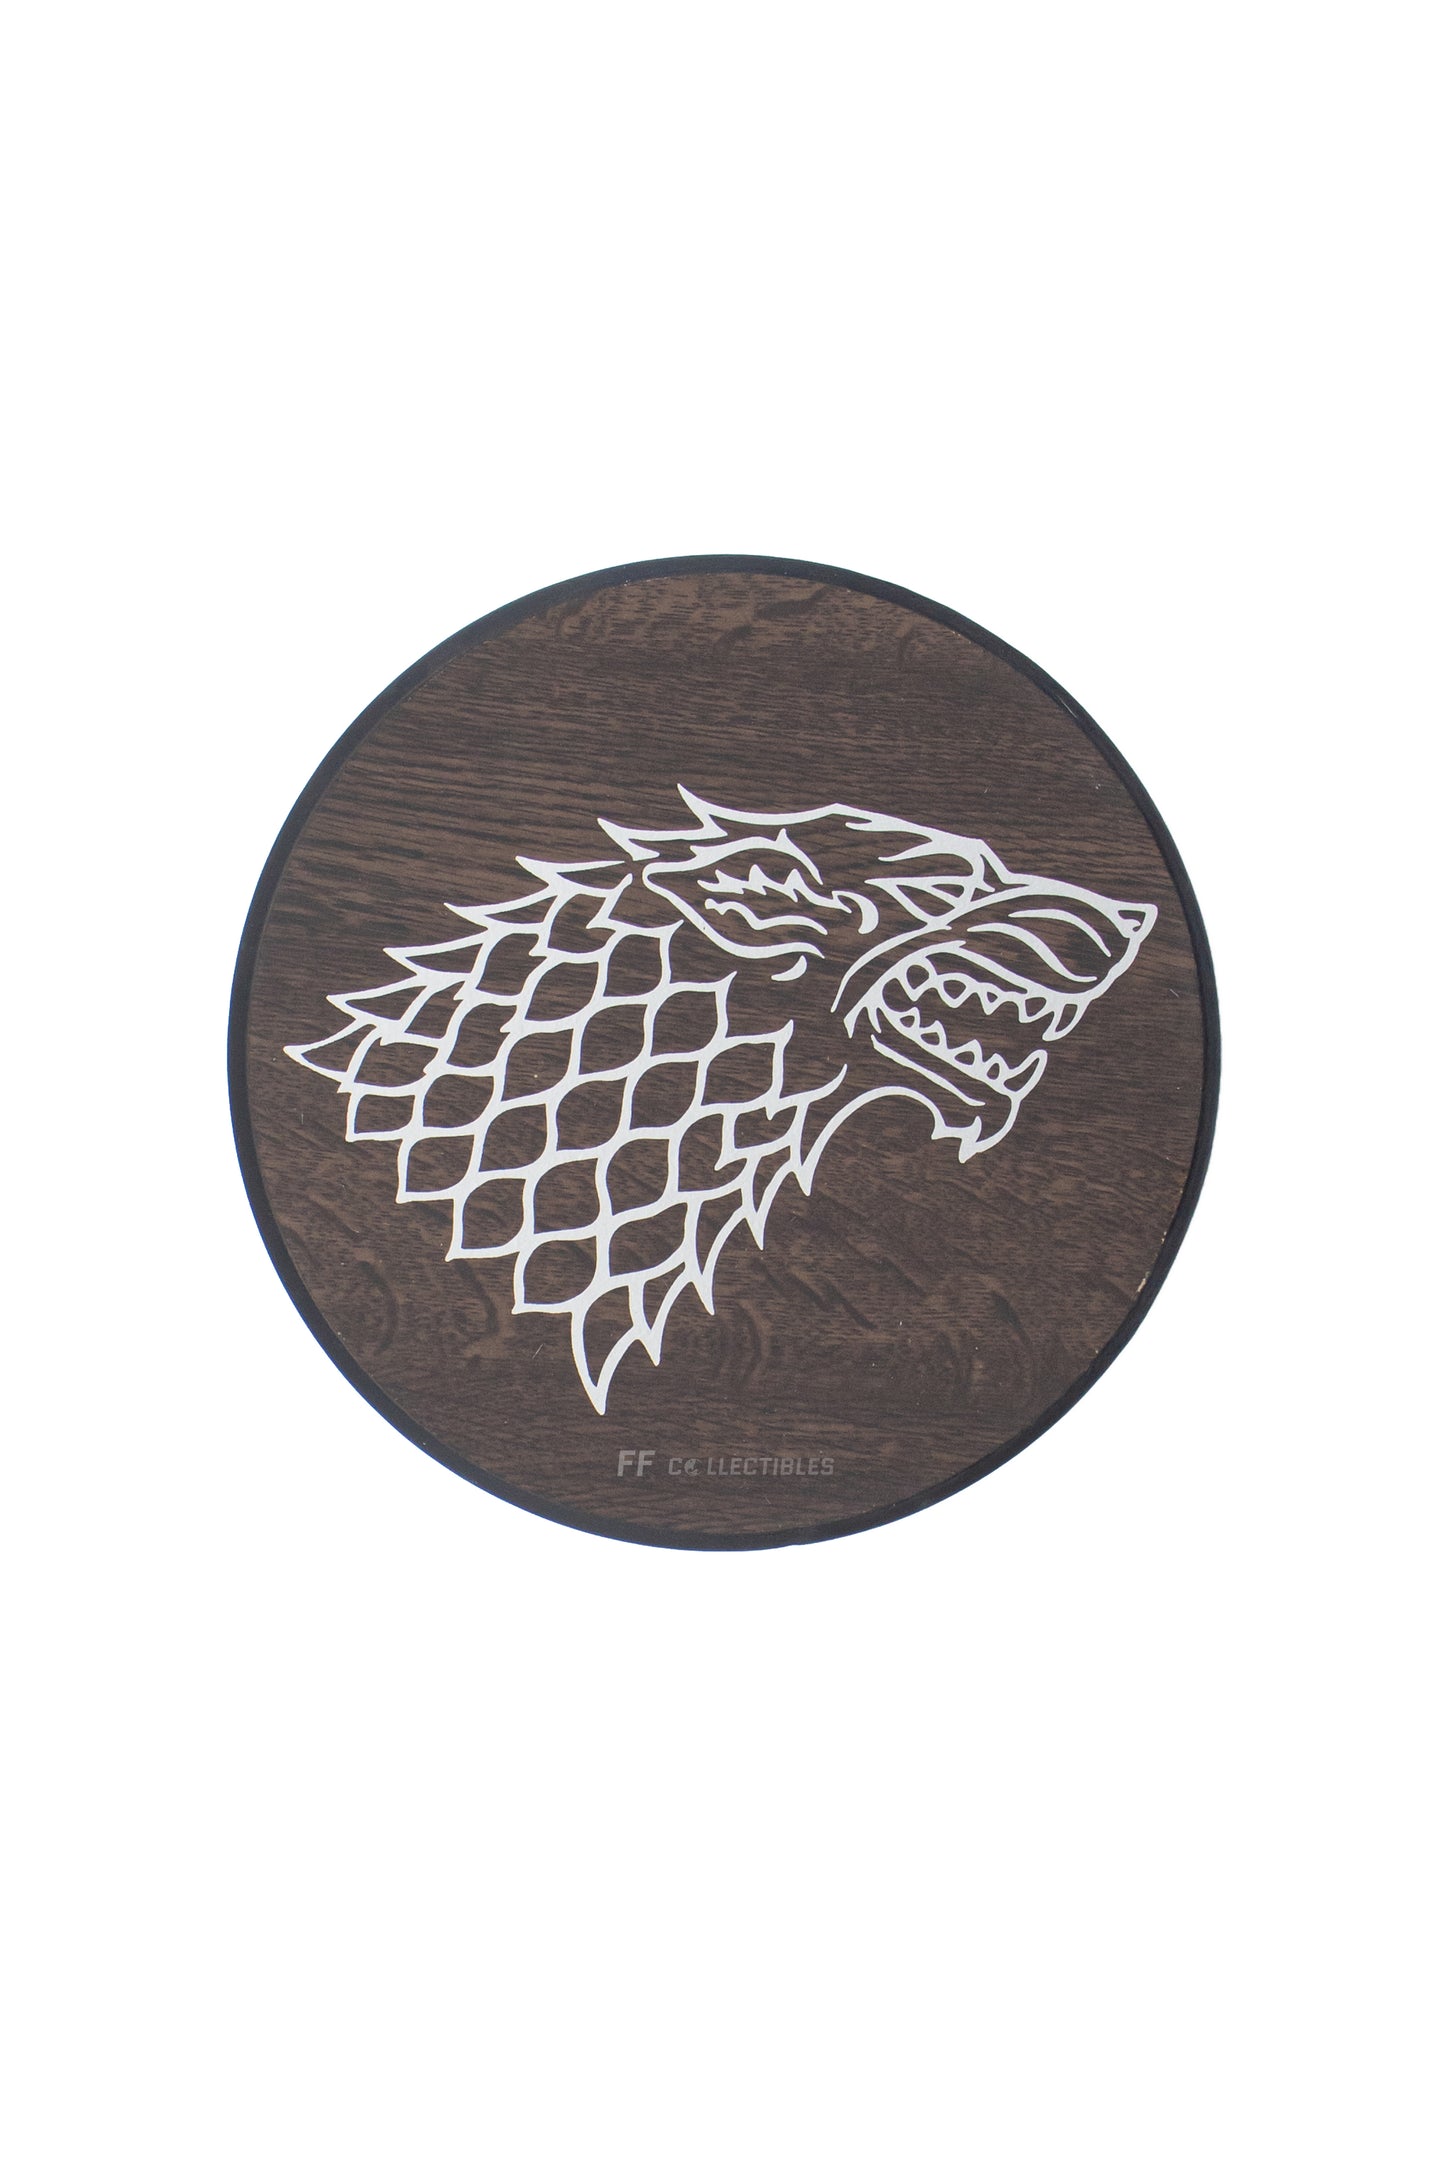 GAME OF THRONES - LONGCLAW + NEEDLE SIBLING BUNDLE (with FREE wall plaques)